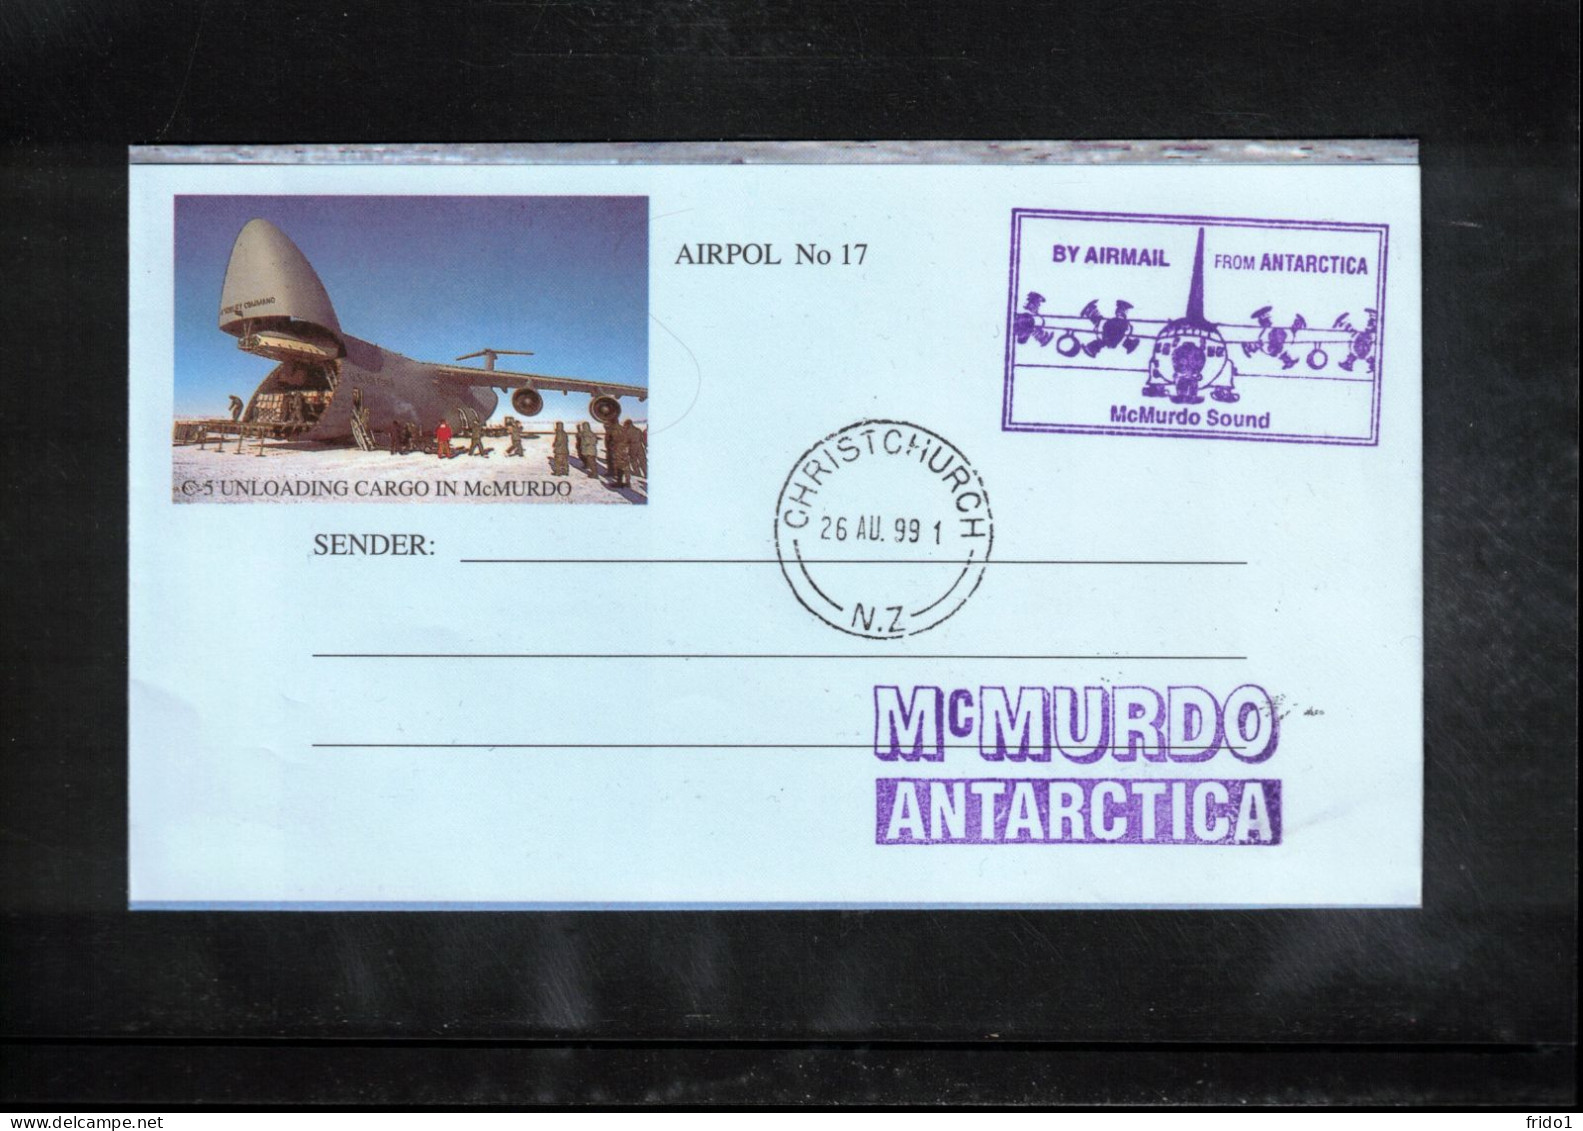 USA 1999 US Antarctic Research Program - Commencement WINFLY Antarctic Supply Programme Interesting Cover - Forschungsprogramme